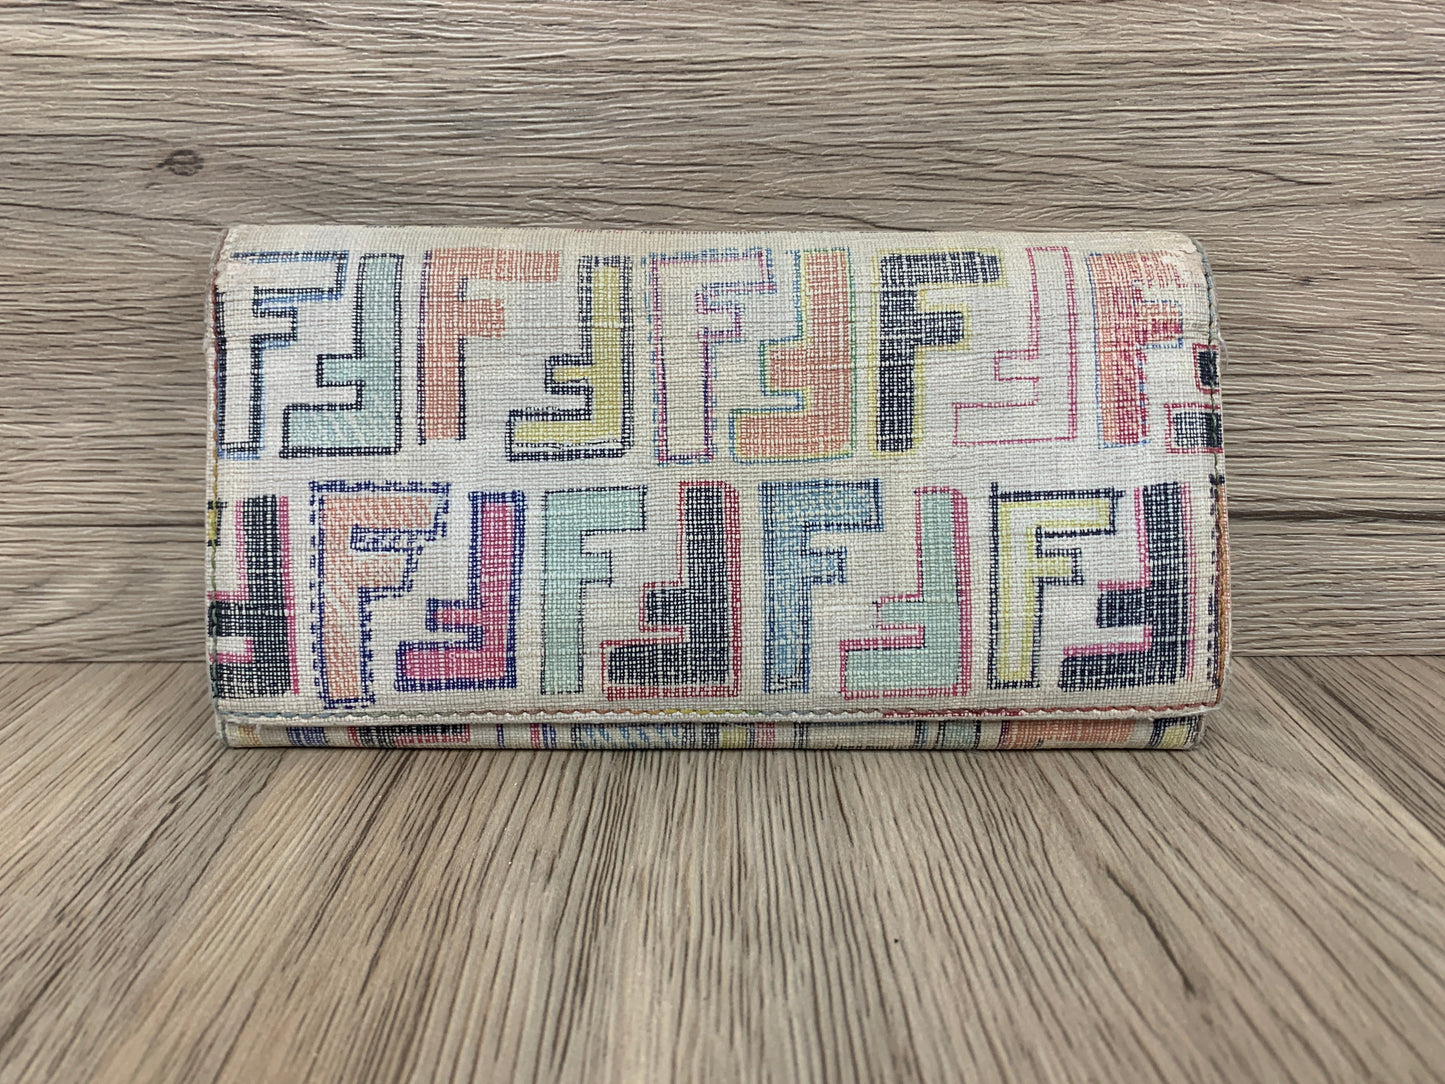 Vintage Fendi long wallet white with coins bag - 16AUG22